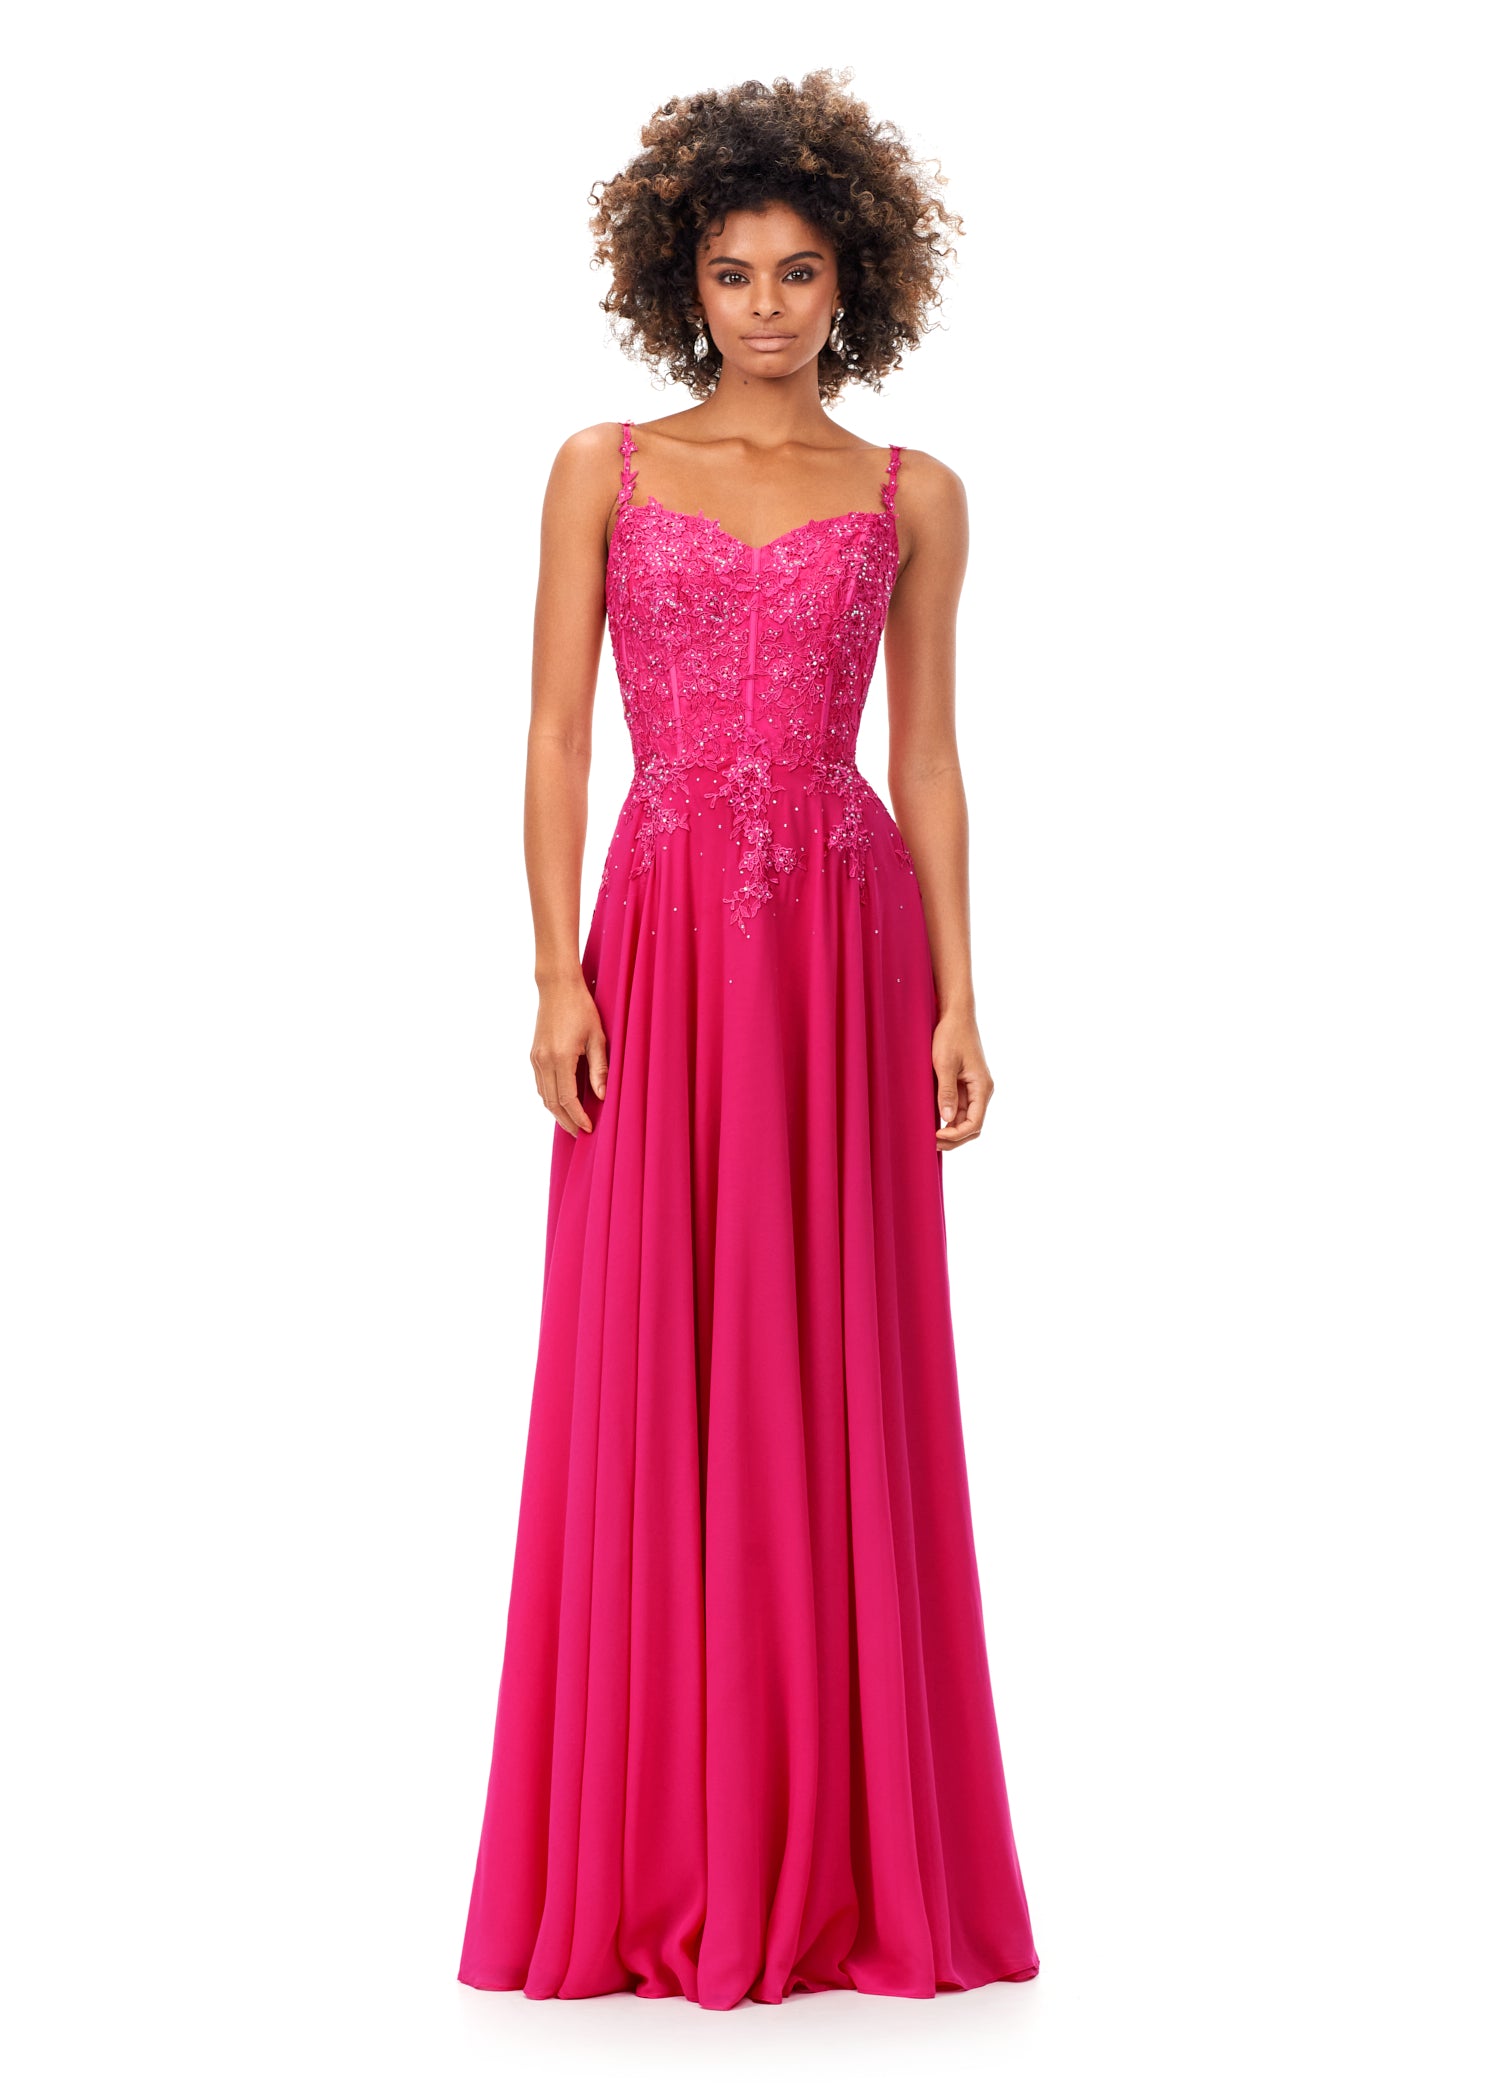 Ashley Lauren 11332 Chiffon Evening Prom Gown with Lace Bustier A Line